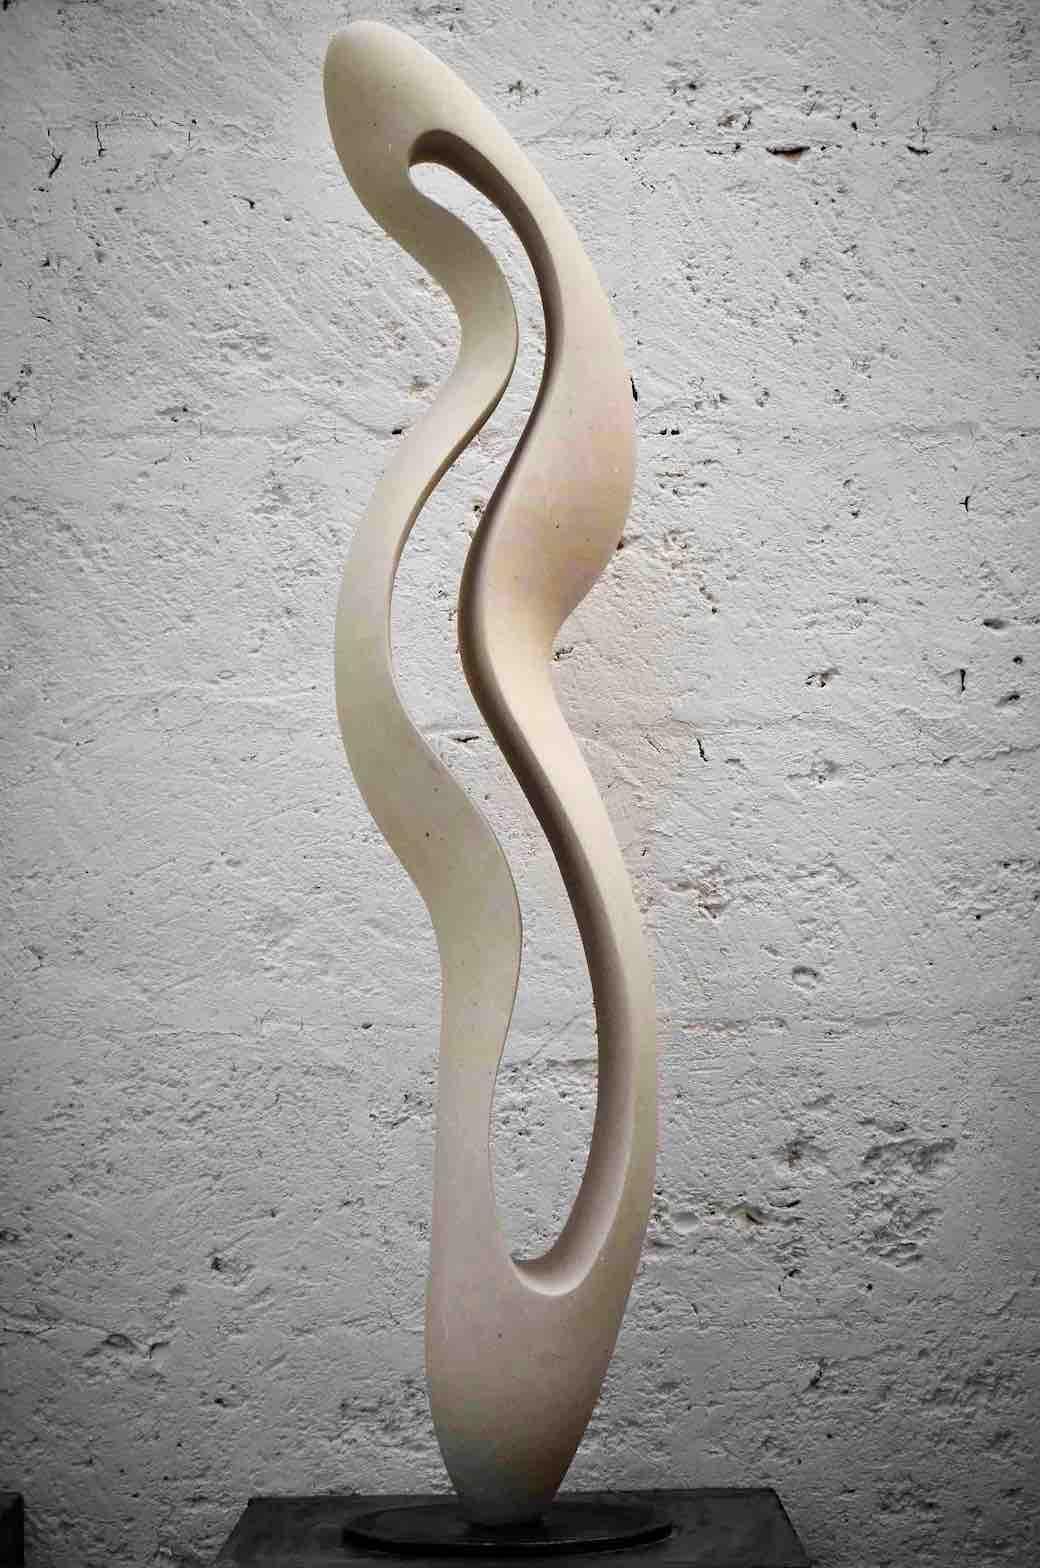 21st century abstract sculpture DROP ART by Renzo Buttazzo from Italy

Sculpture in Lecce Stone
Delivered with a certificate of authenticity.

Since 1886 Renzo Buttazzo work with Pietra Leccese (limestone from Lecce), and during this time he